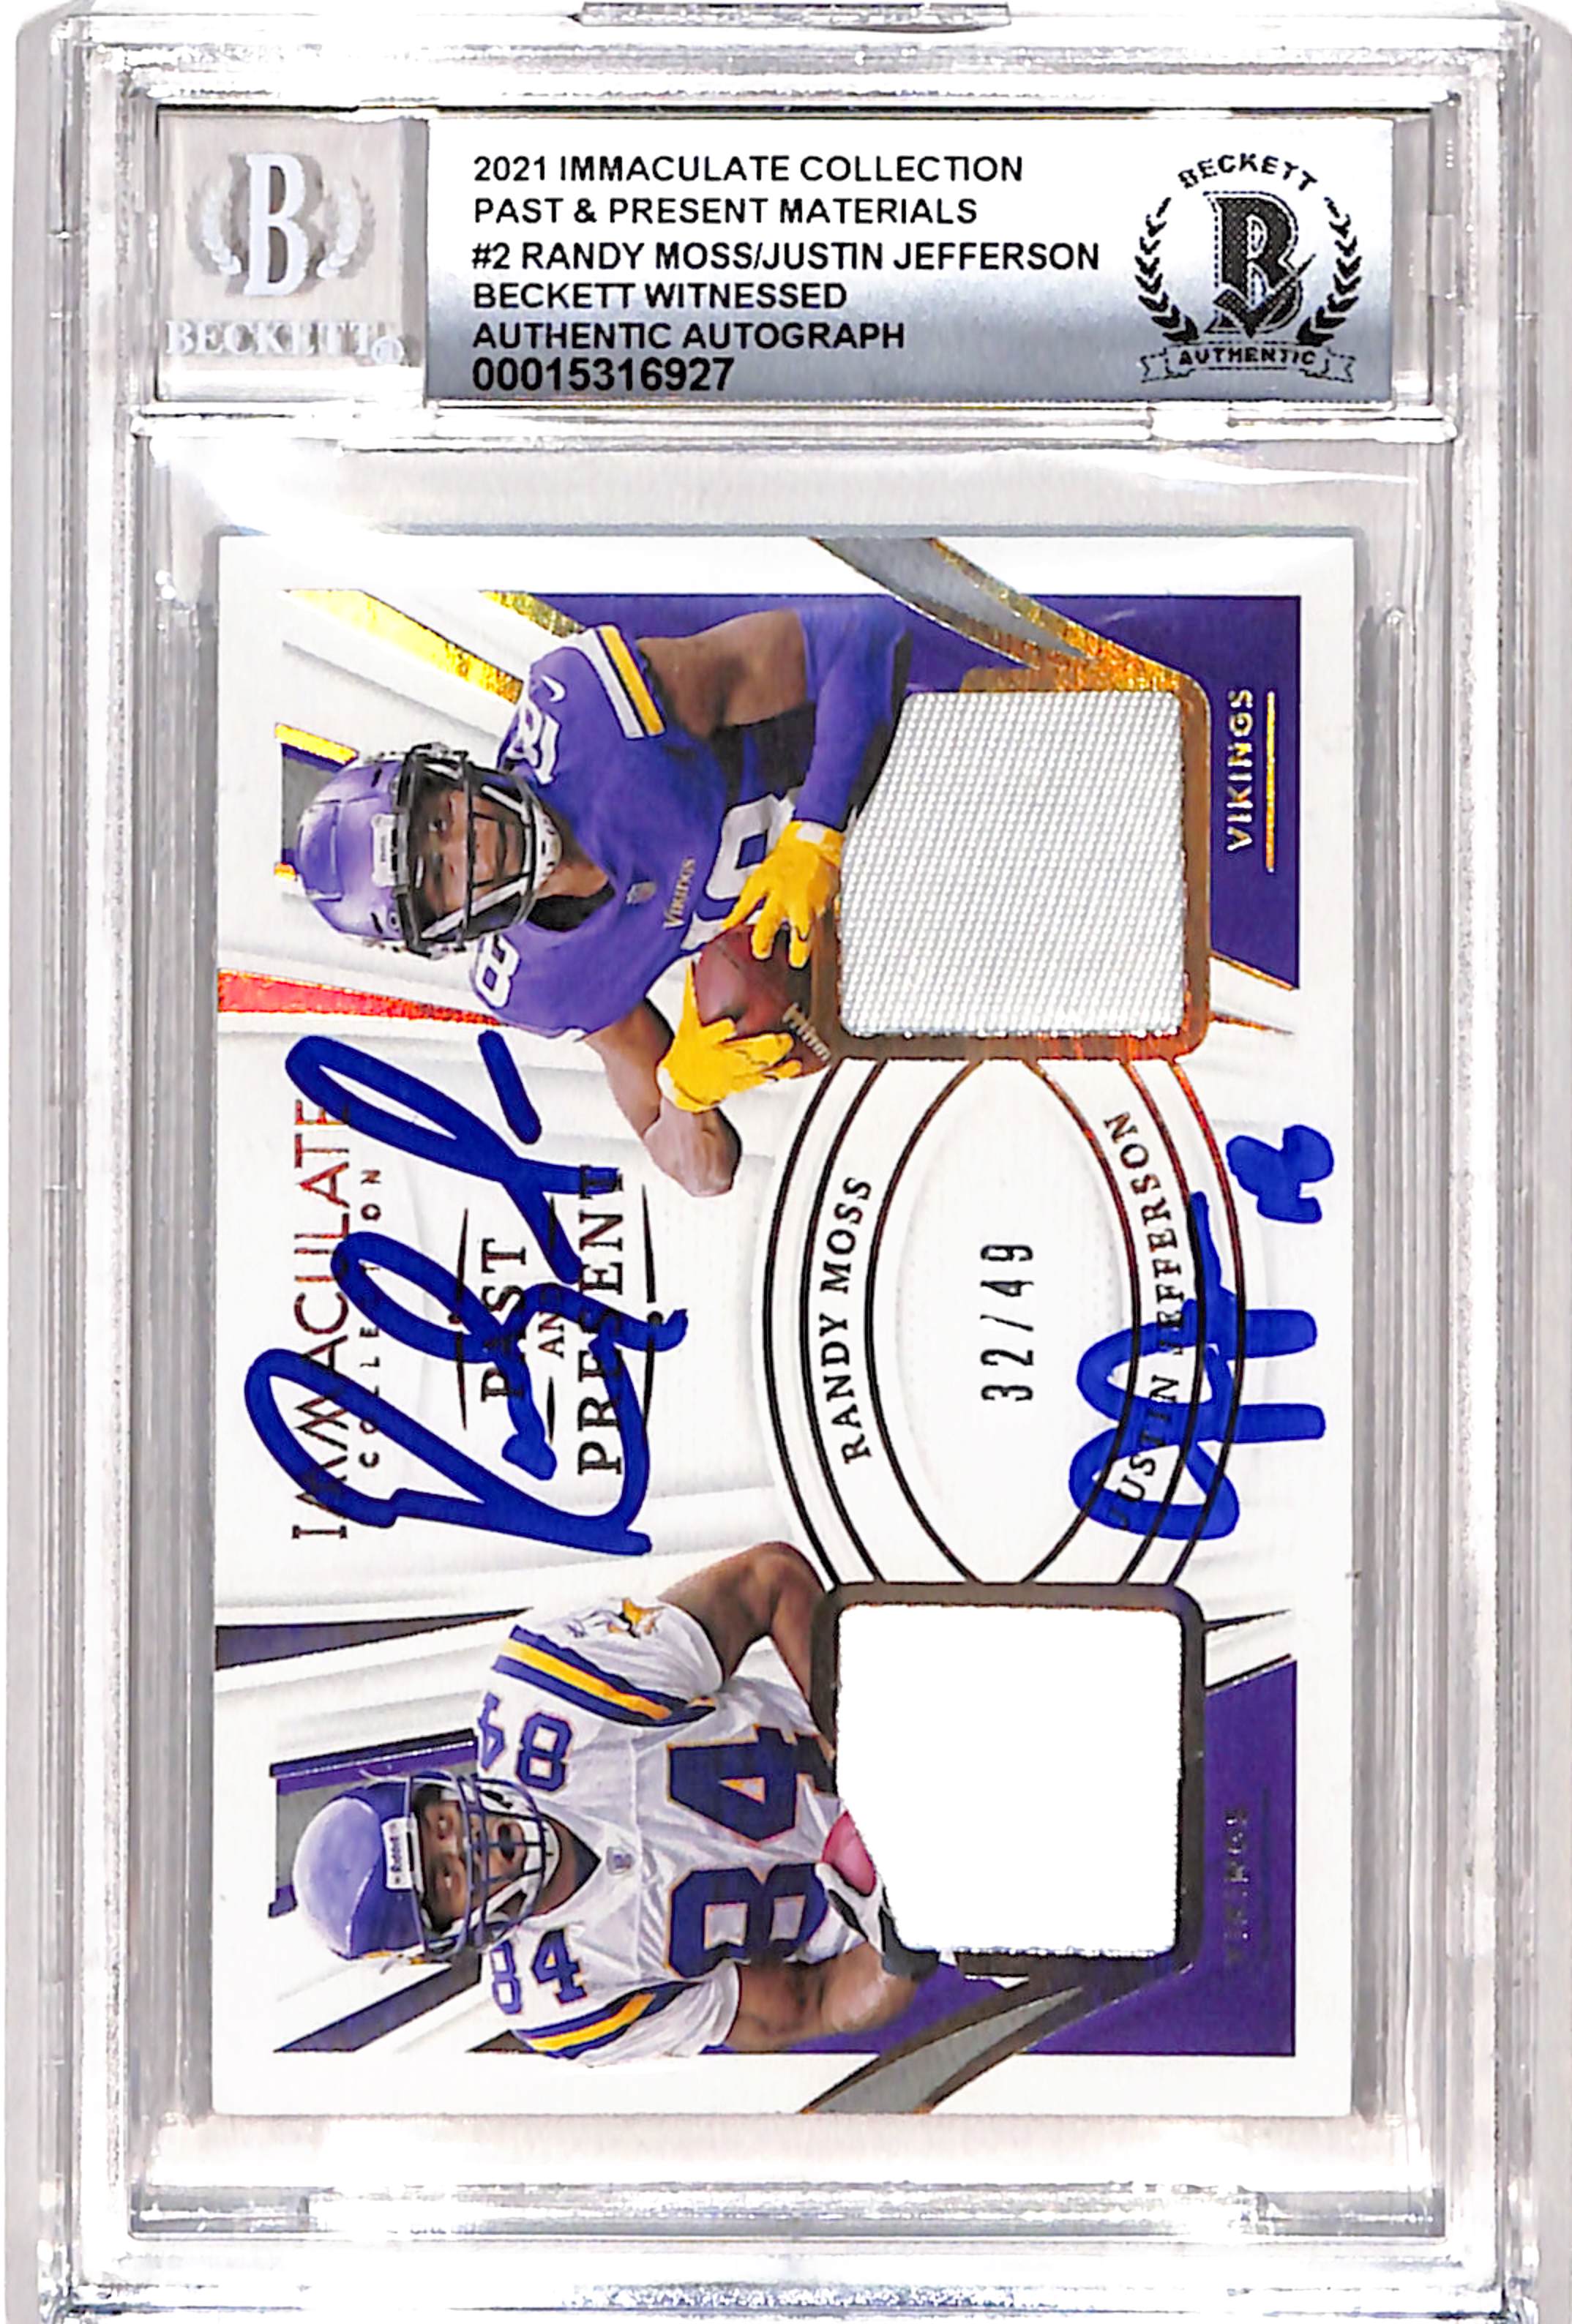 Randy Moss Justin Jefferson Signed 21 Immaculate Card 10 Auto BAS